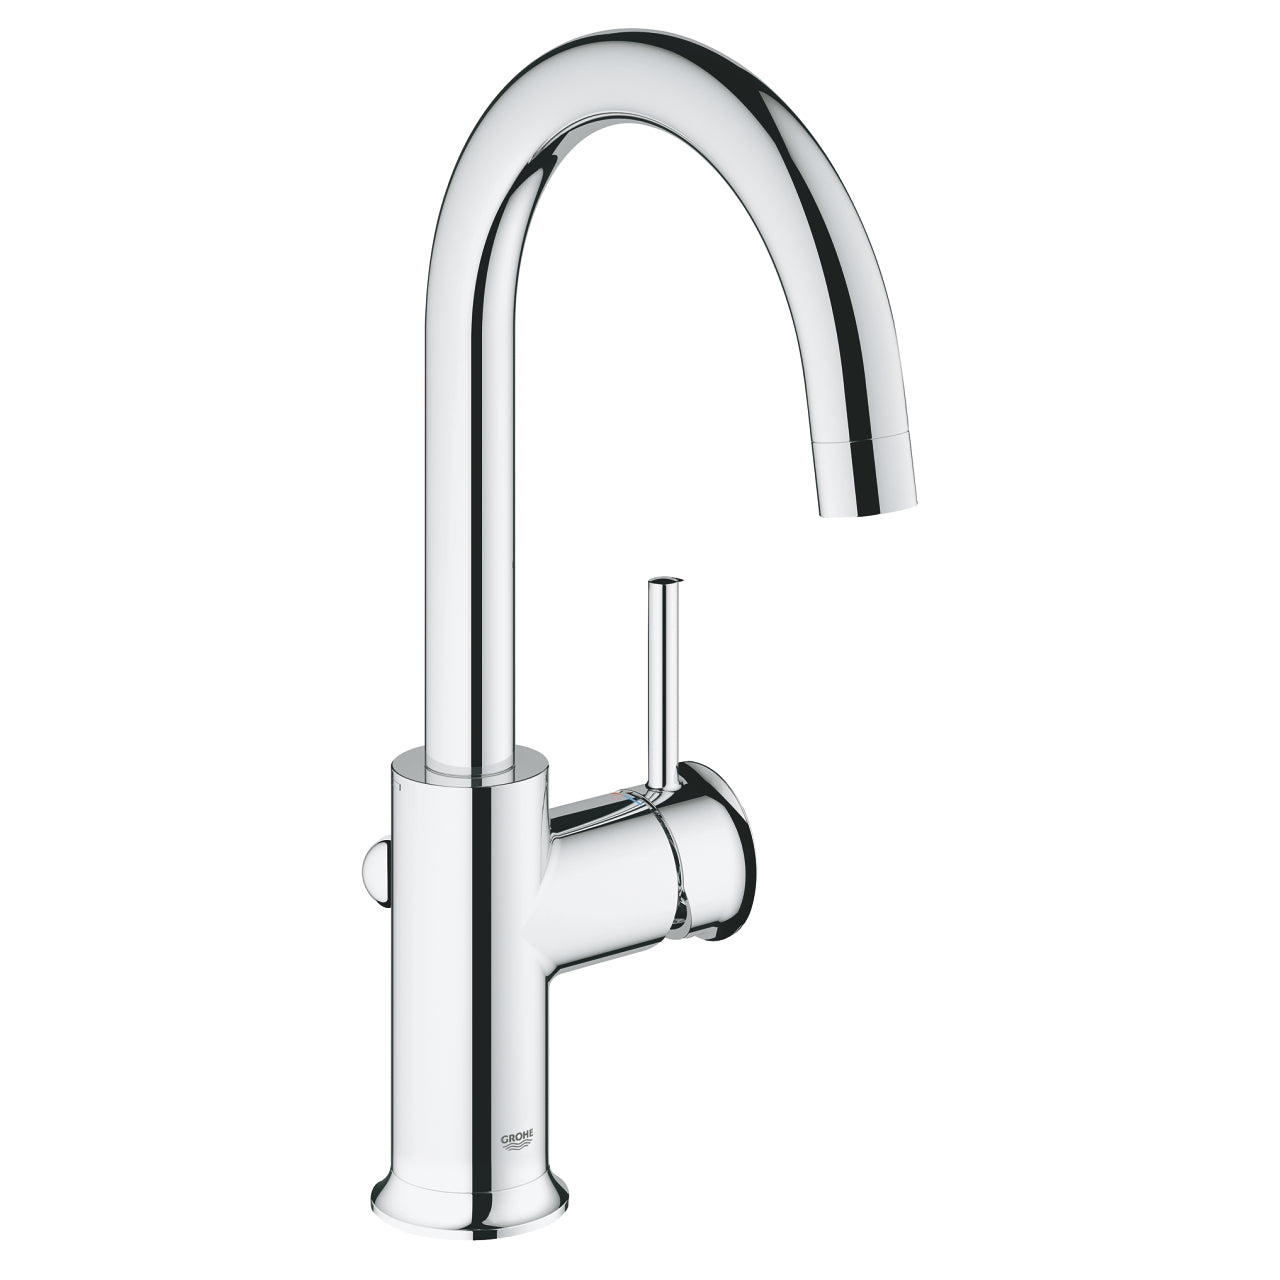 Grohe Bauclassic Single Lever Basin Mixer 1 / 2 Inch